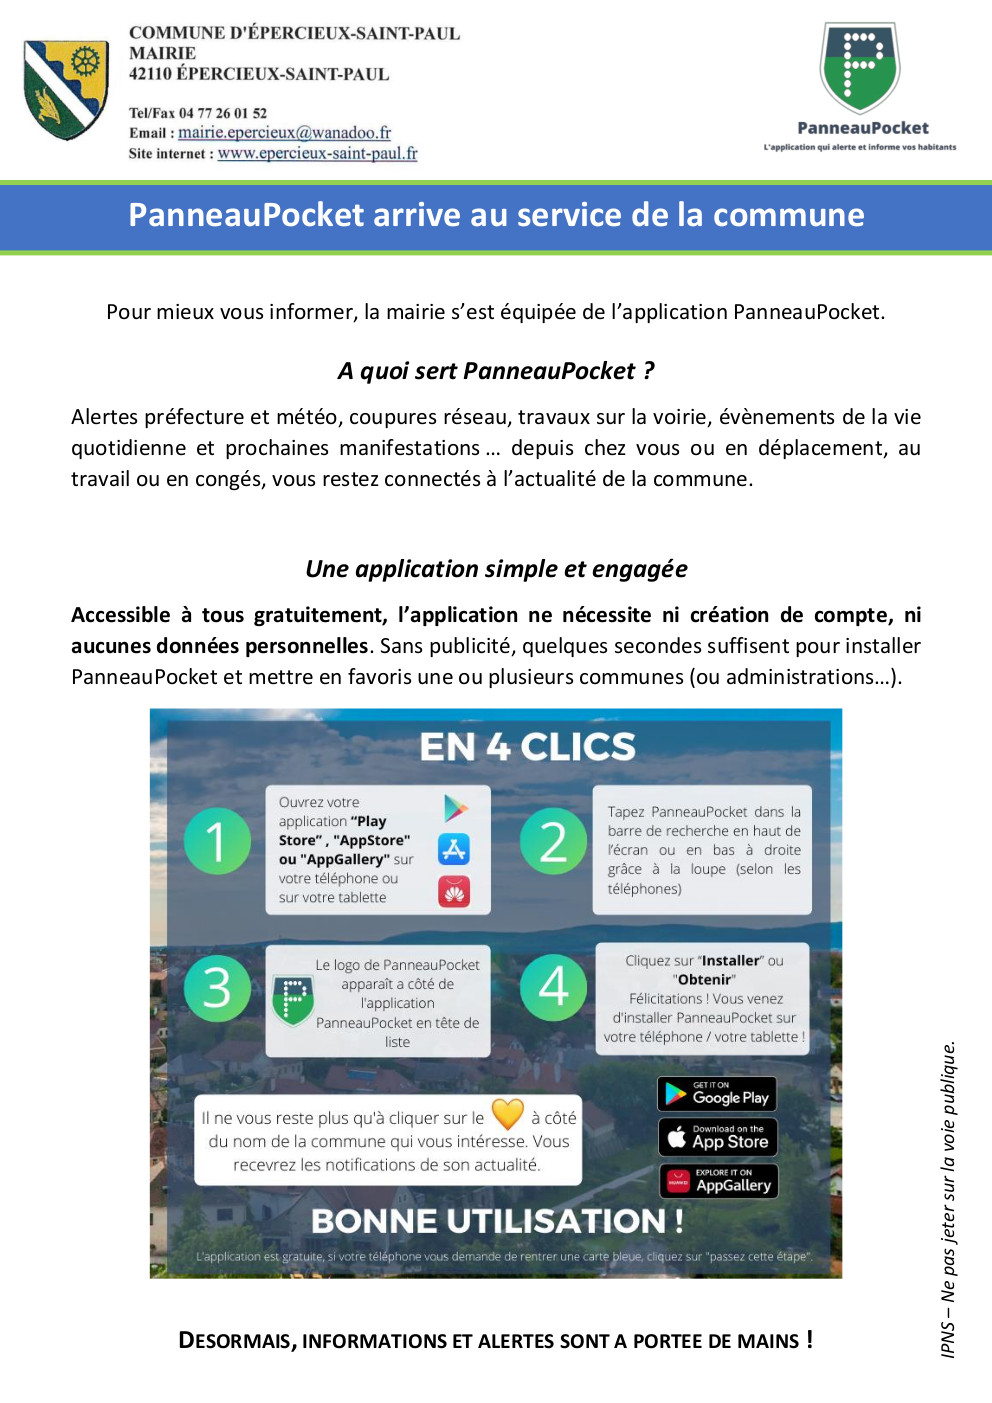 Epercieux Tract panneaupocket 1